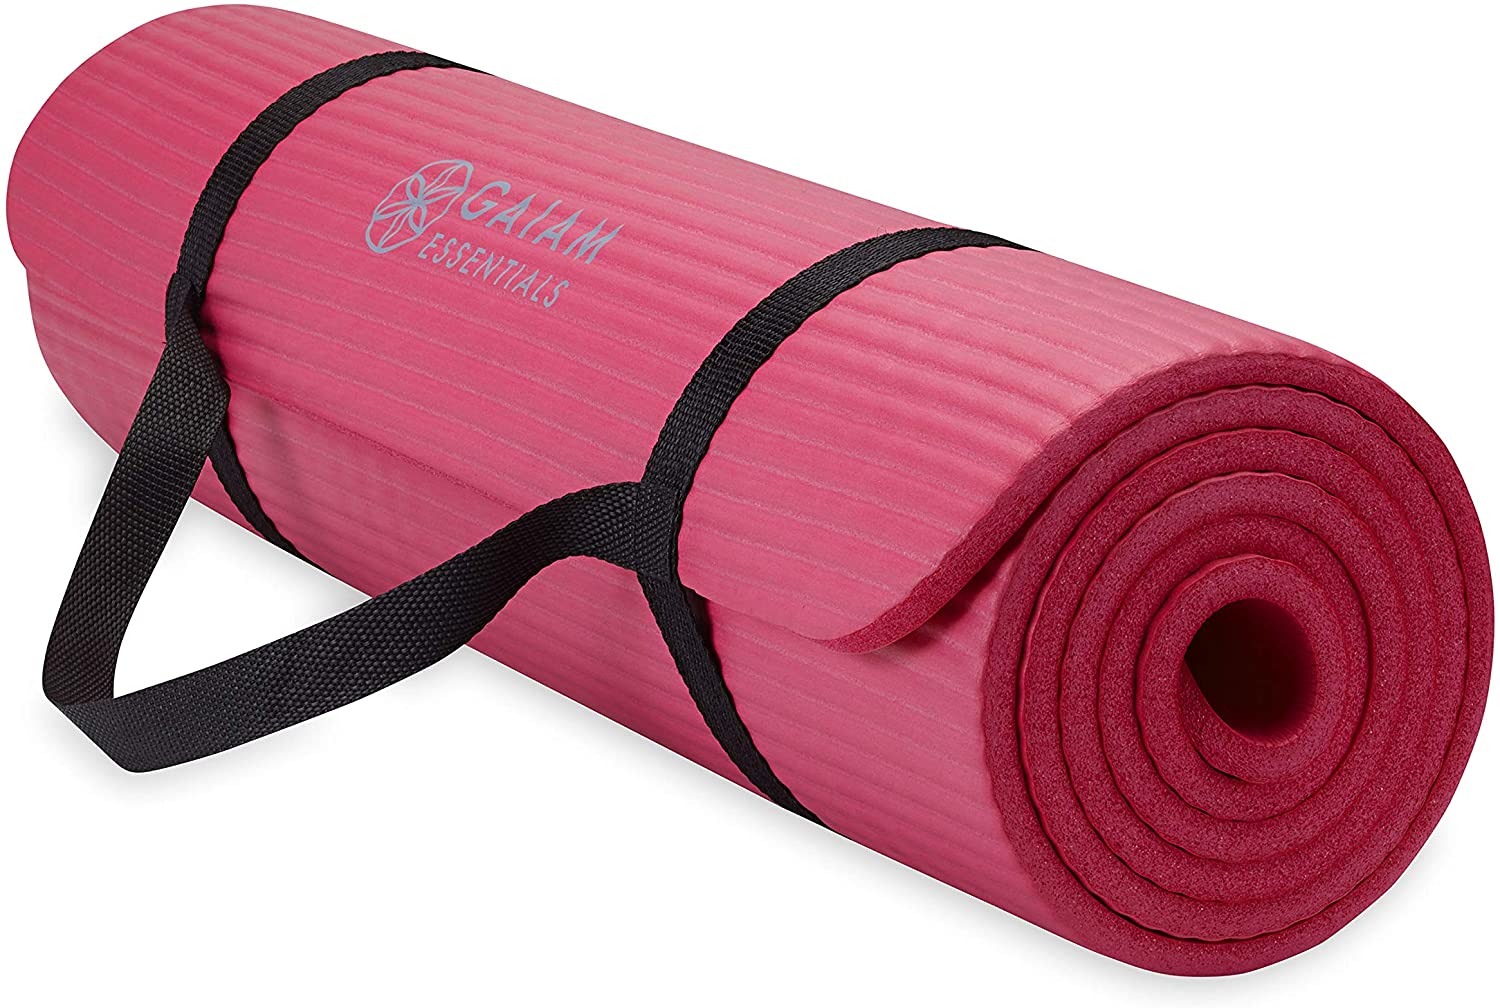 Thick Yoga Mat - Buy Pink Yoga Mats & Improve Your Workouts – ByAlex